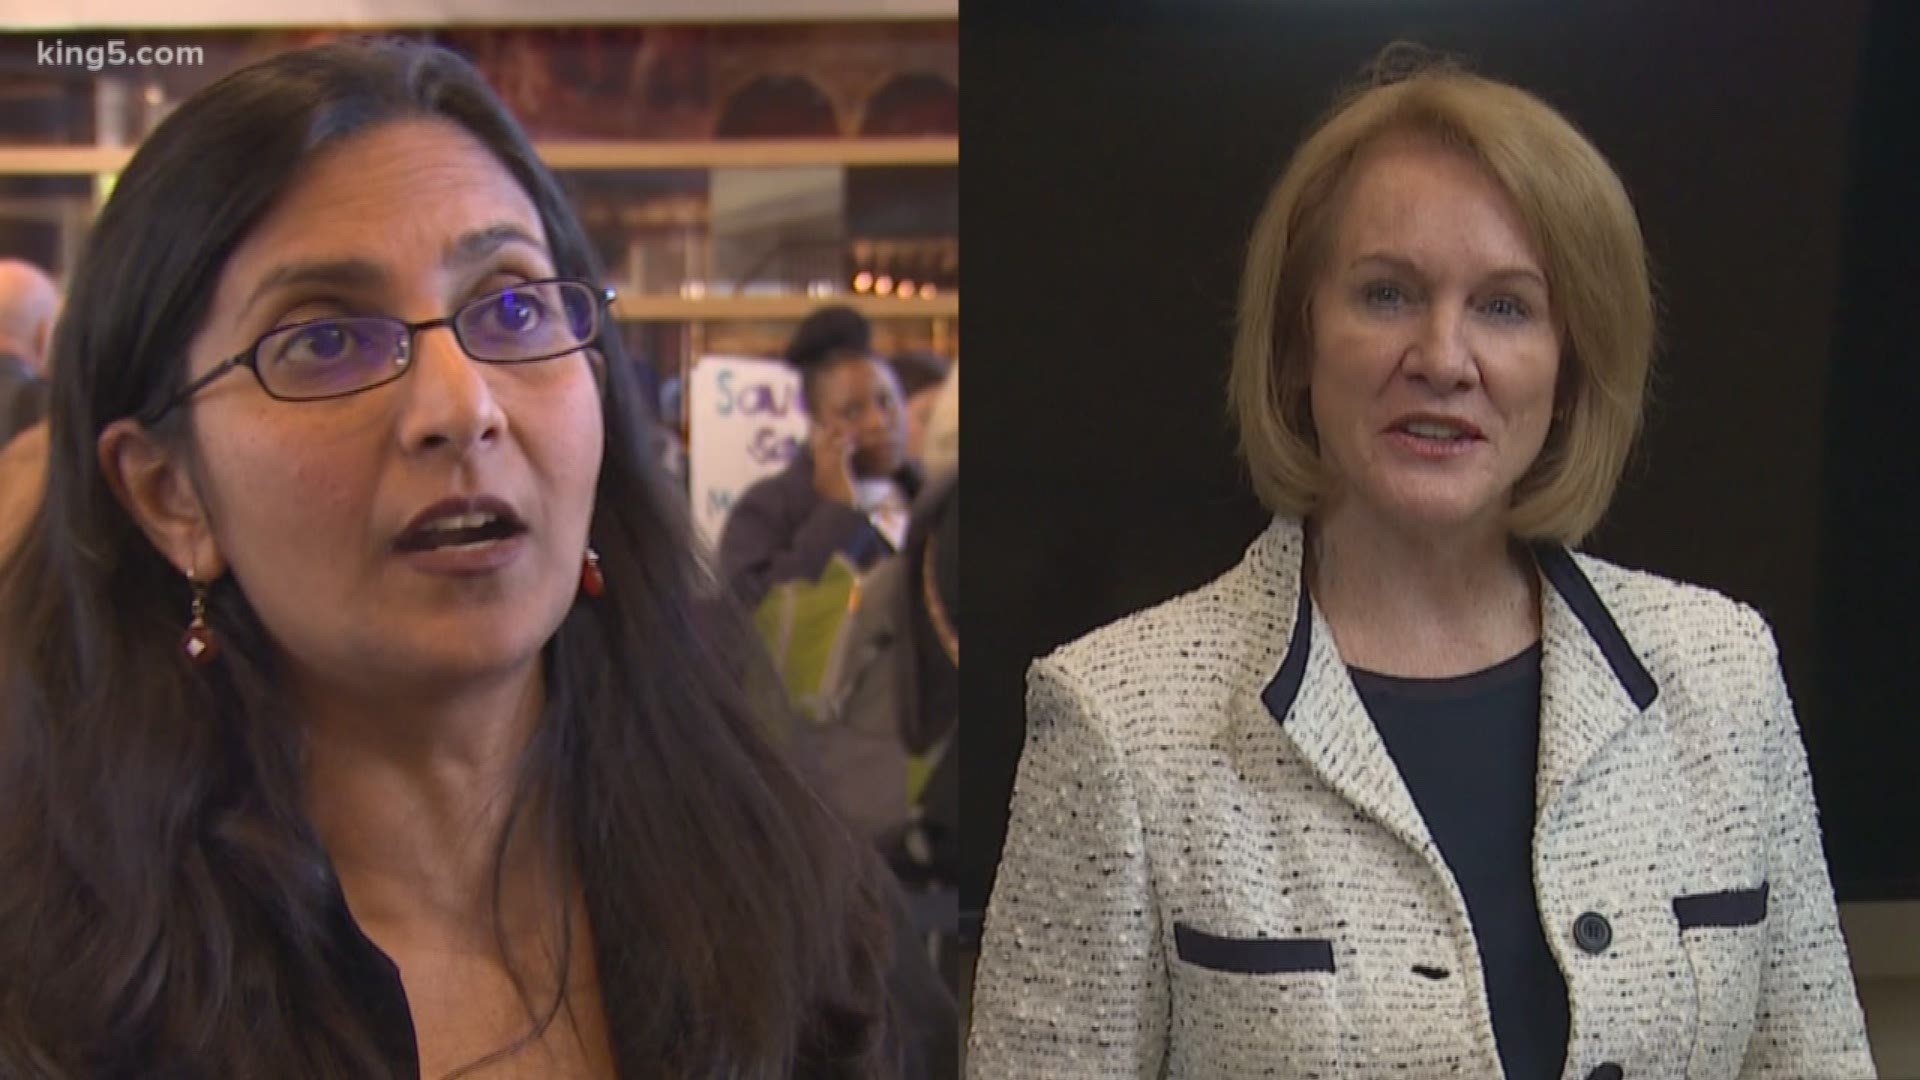 A political fight has erupted at Seattle City Hall between Council Member Kshama Sawant and Jenny Durkan over homelessness. It came to a head with the Council Member's push to rescind Durkan's nomination for the head of the Department of Human Services. KING 5's Chris Daniels tells us why the Mayor scored a victory for now.